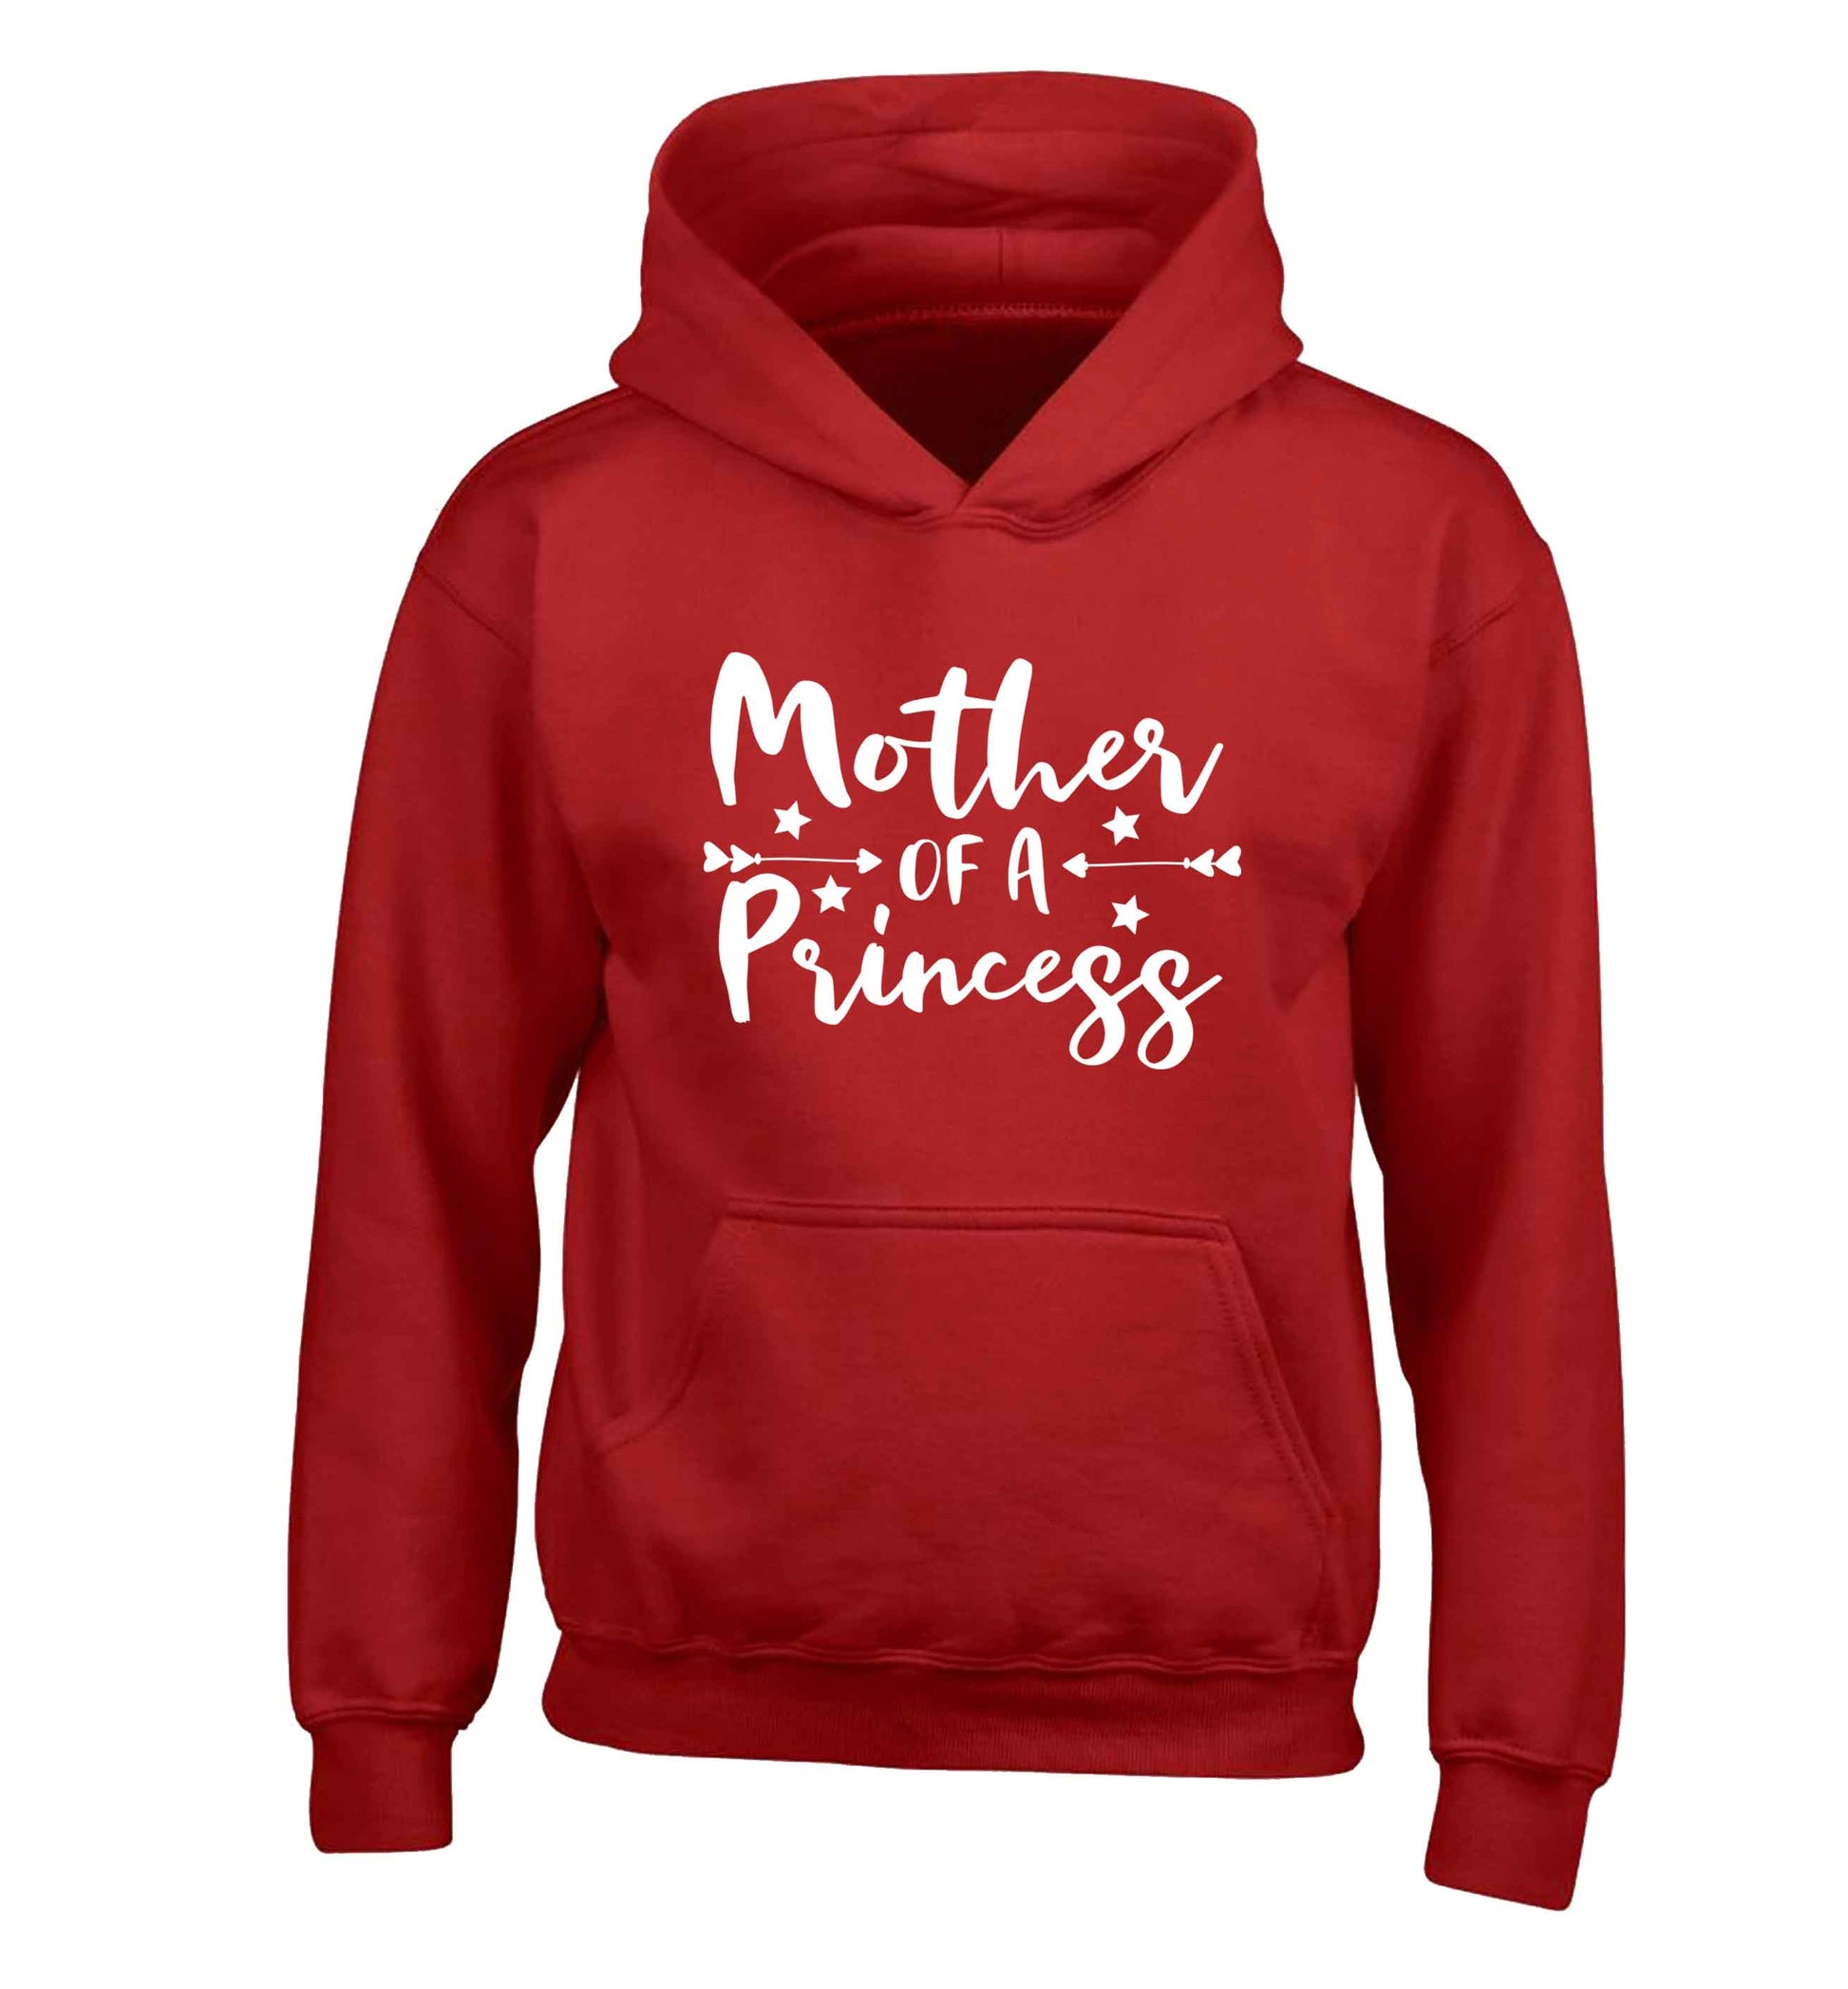 Mother of a princess children's red hoodie 12-13 Years